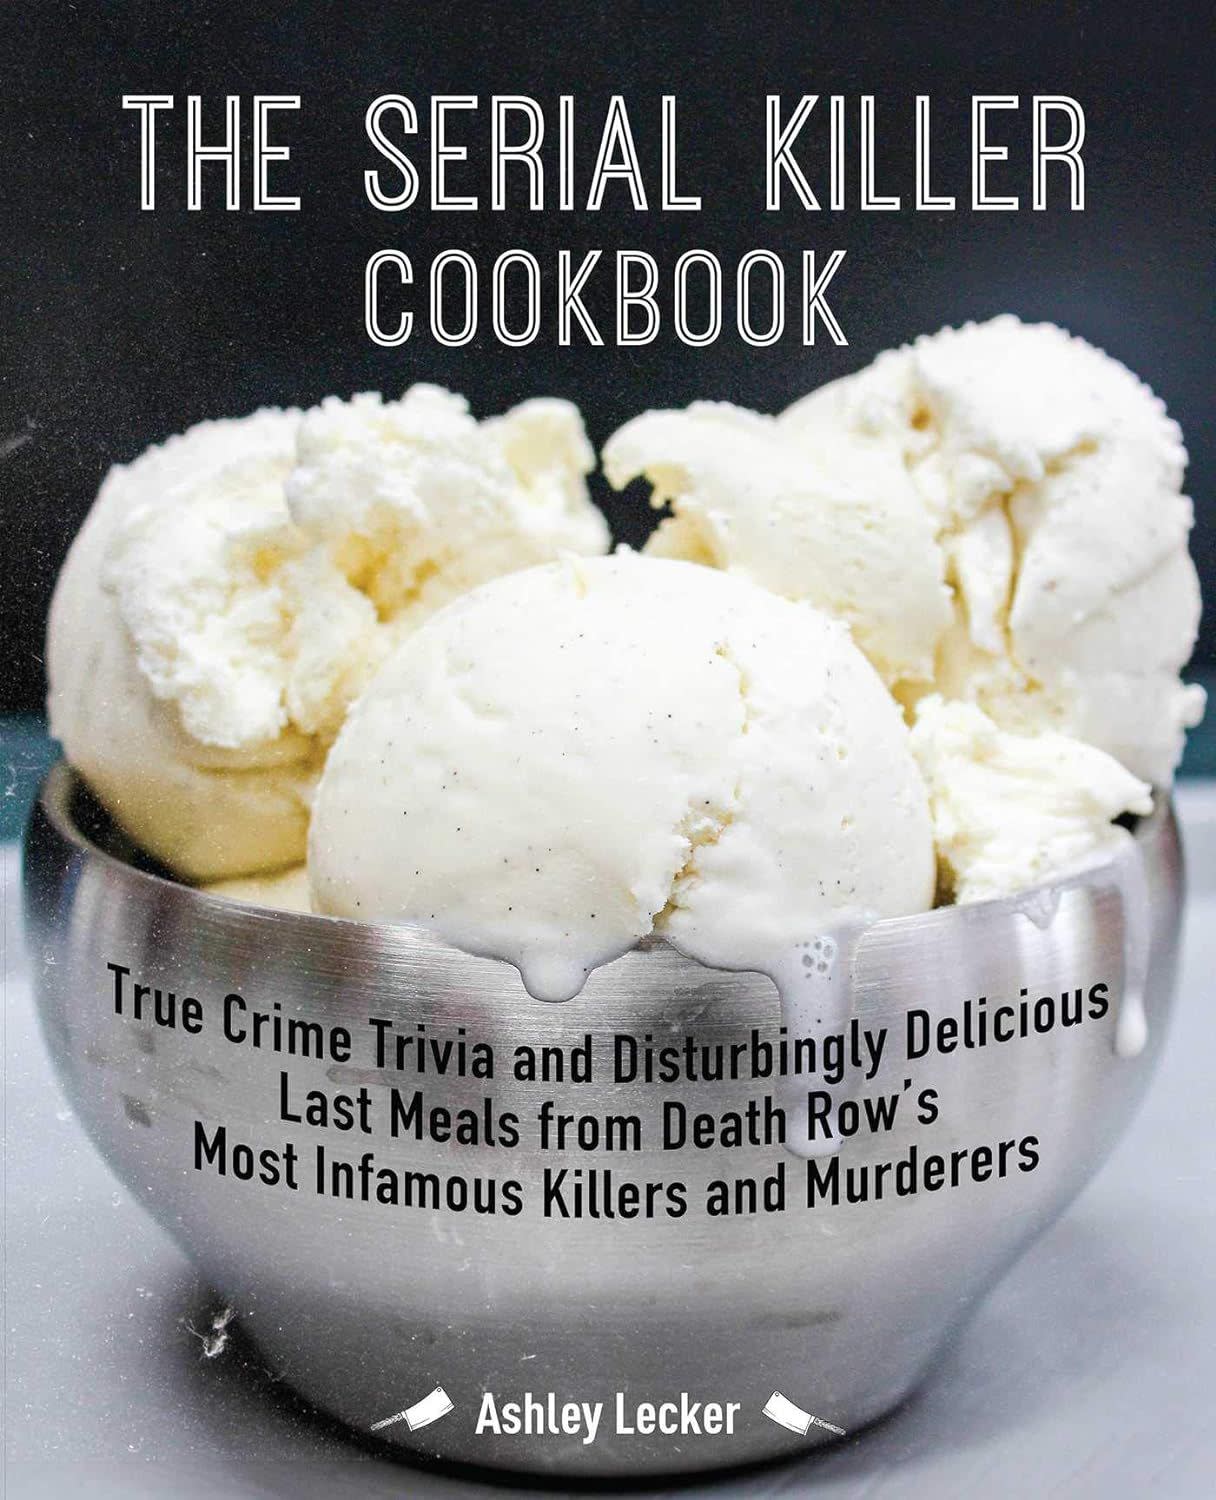 The Serial Killer Cookbook: True Crime Trivia and Disturbingly Delicious Last Meals from Death Row's Most Infamous Killers and Murderers, By Ashley Lecker